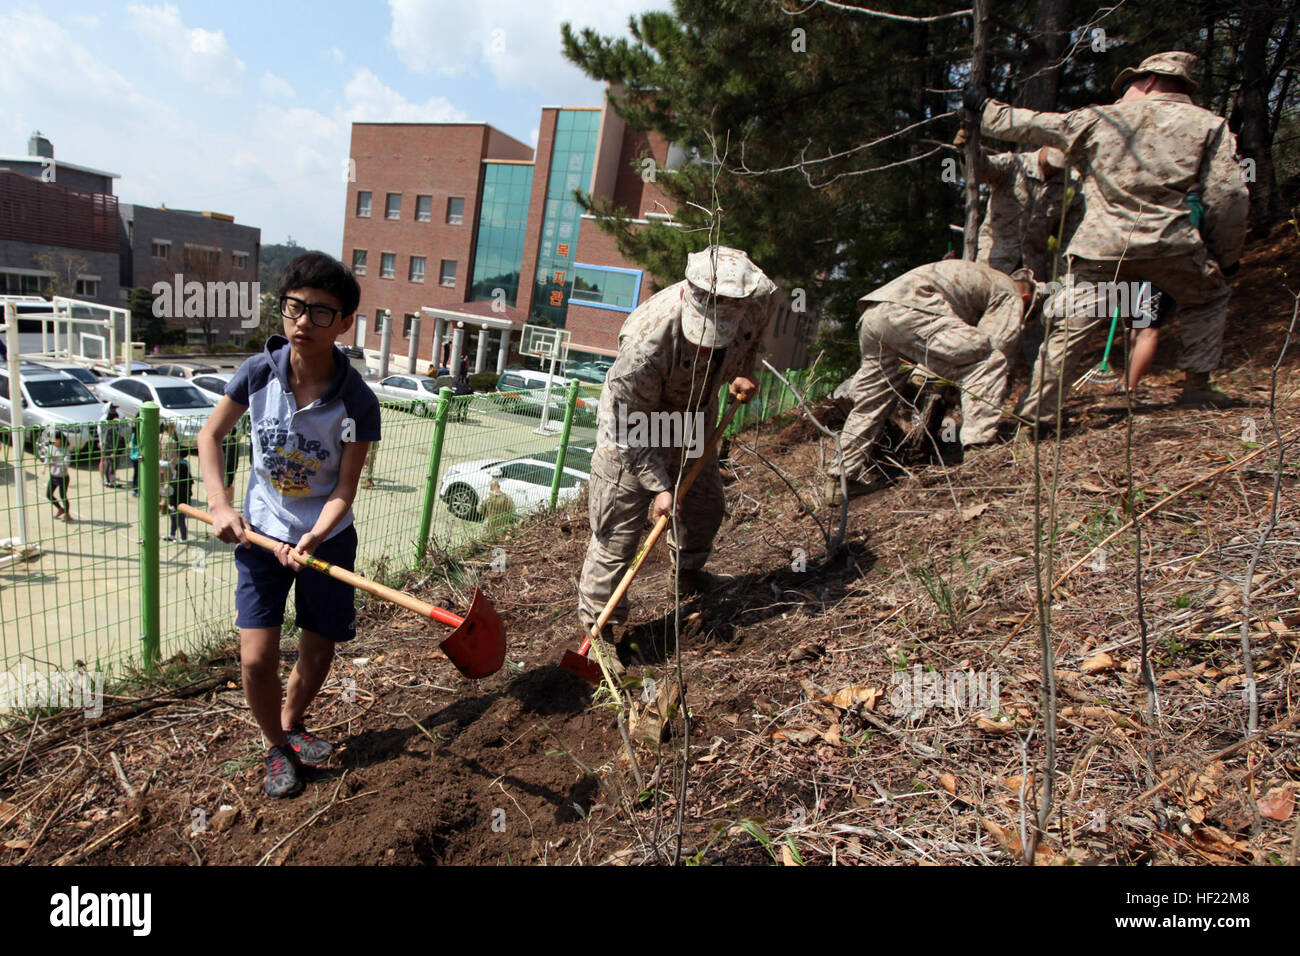 A boy from the Pohang Orphanage helps Marines of the 31st Marine Expeditionary Unit clear land for the planting of rose bushes during a visit here, April 5. The Pohang orphanage was founded after the Korean War in 1953 by a Navy chaplain from the 1st Marine Air Wing. In 1954, the Navy Seabees constructed the original building. Since then, the children taken in by the orphanage have known regular visits from their camouflaged friends. The visit comes at the conclusion of the 31st MEU's participation in Exercise Ssang Yong 2014, a bilateral training event that is a tribute to the maturity of the Stock Photo